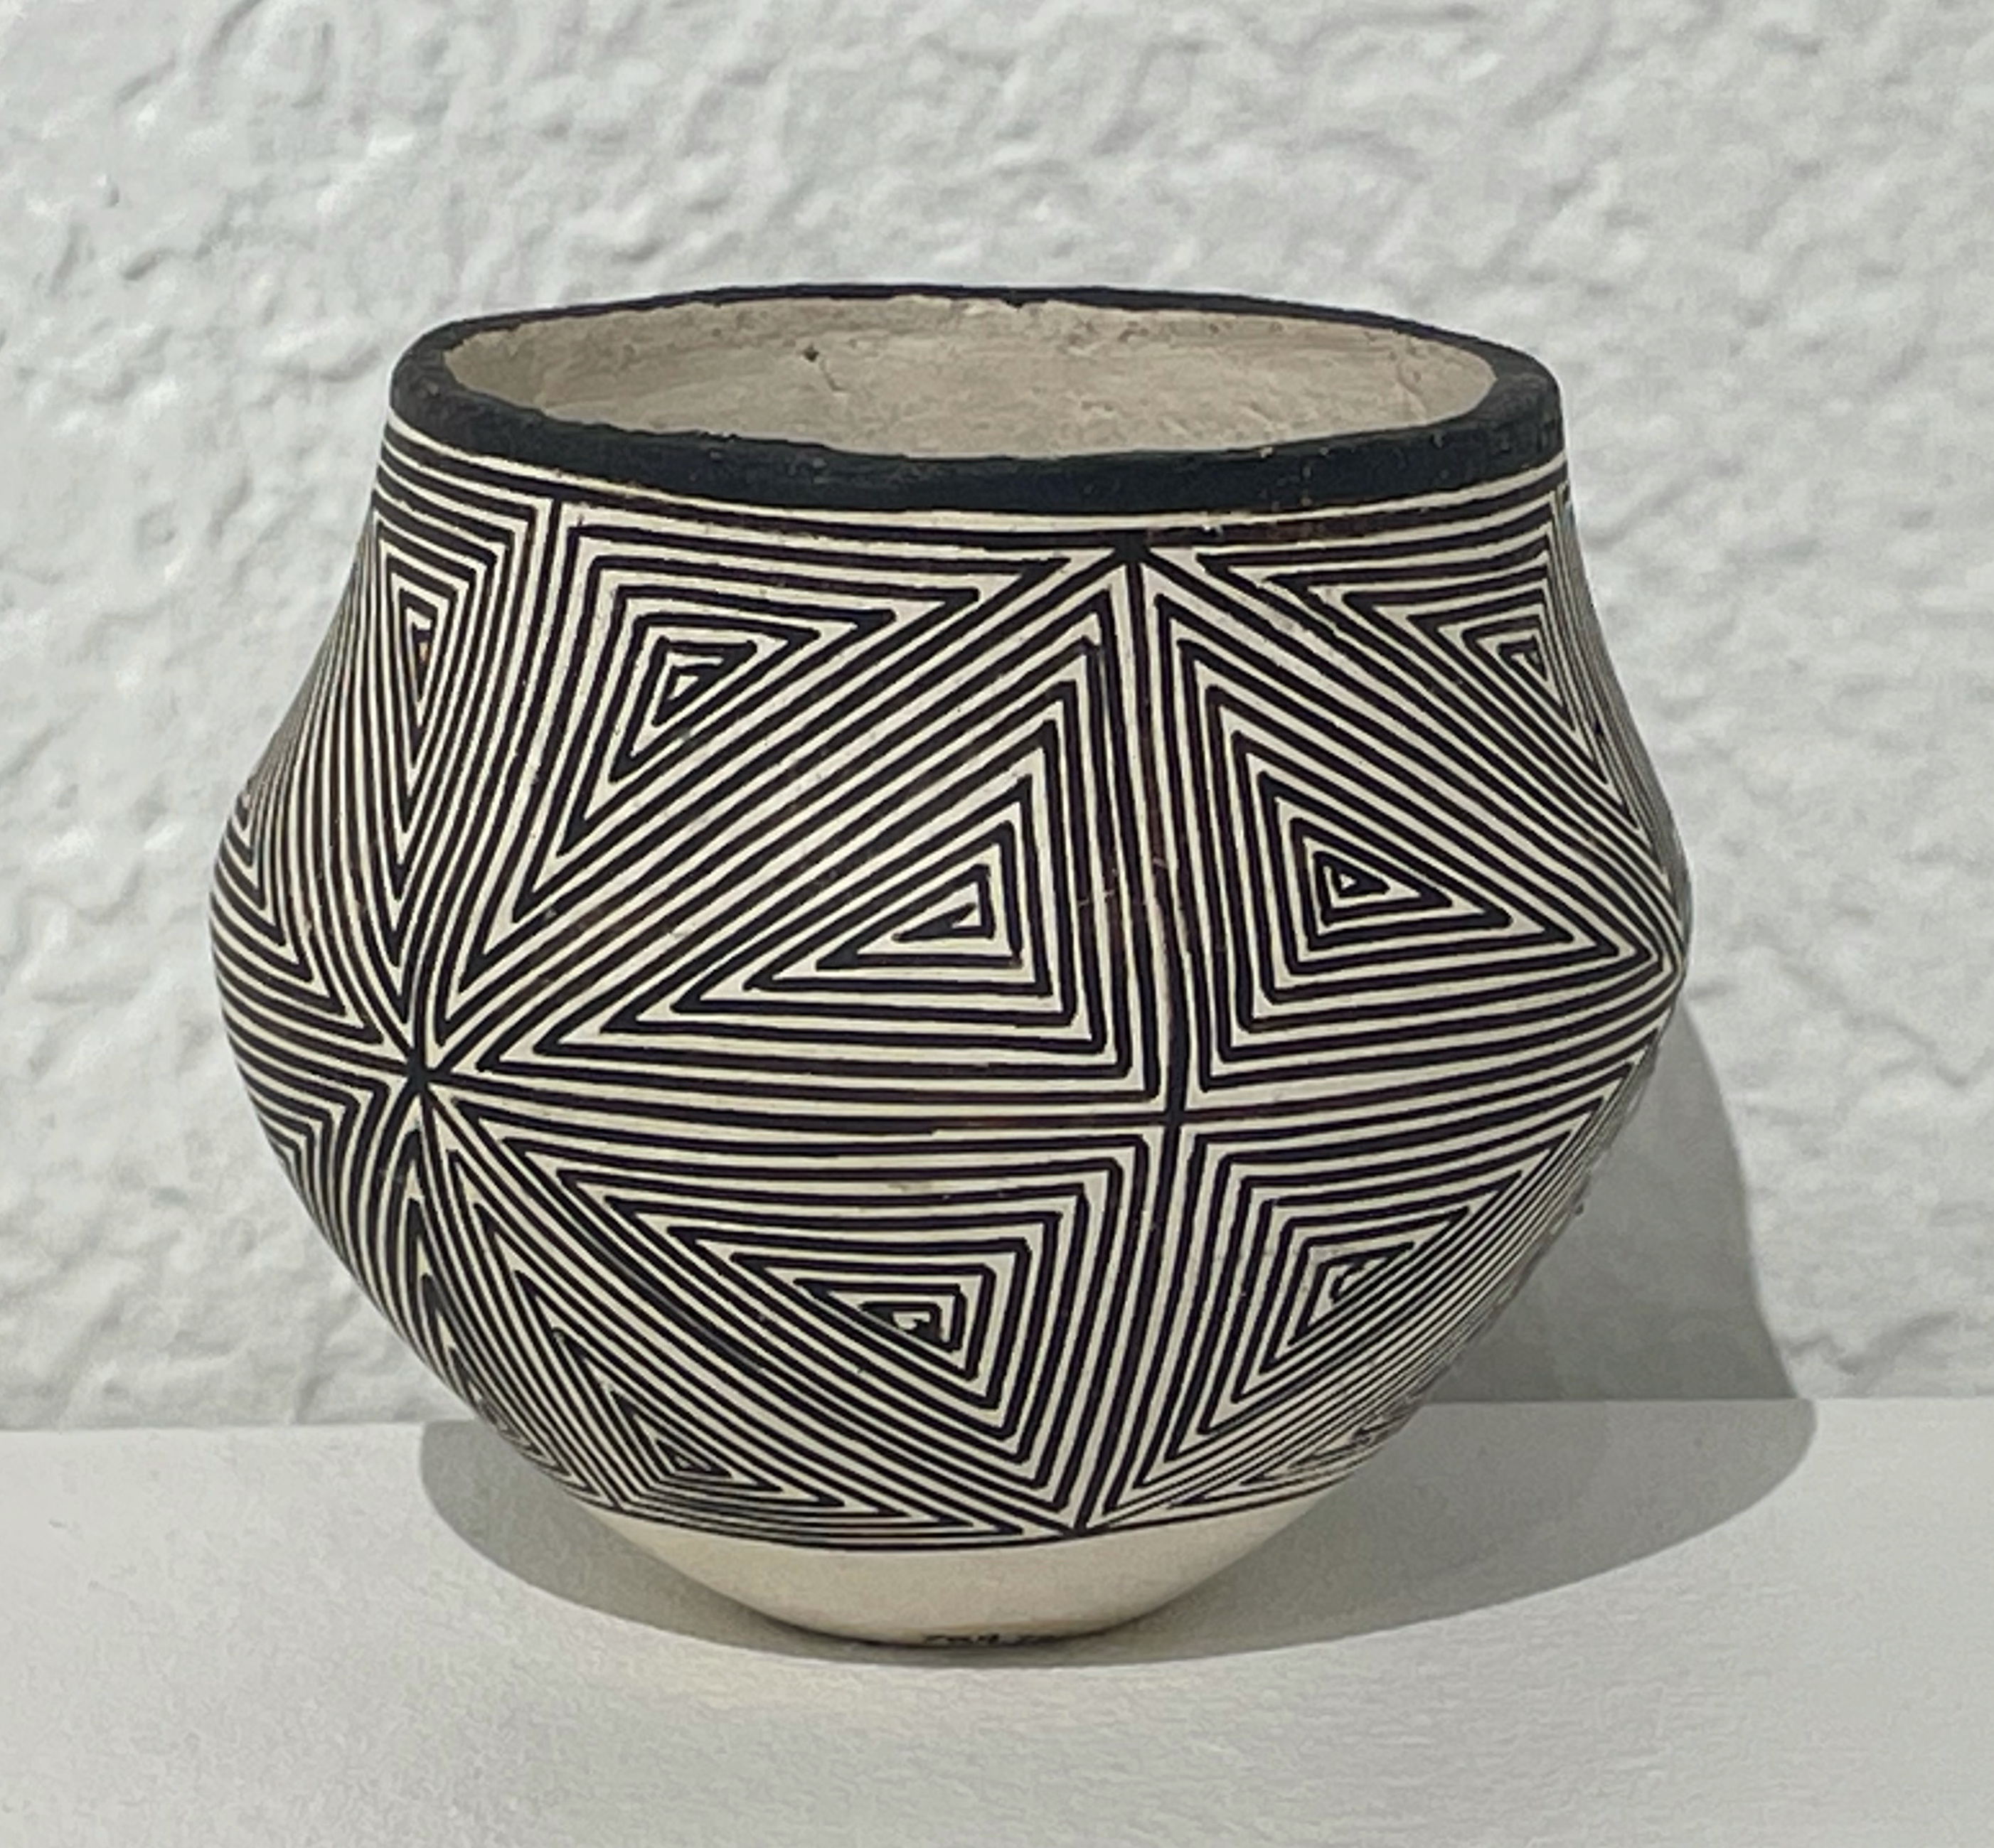 Small bowl with black and white linear designs by Lucy Lewis